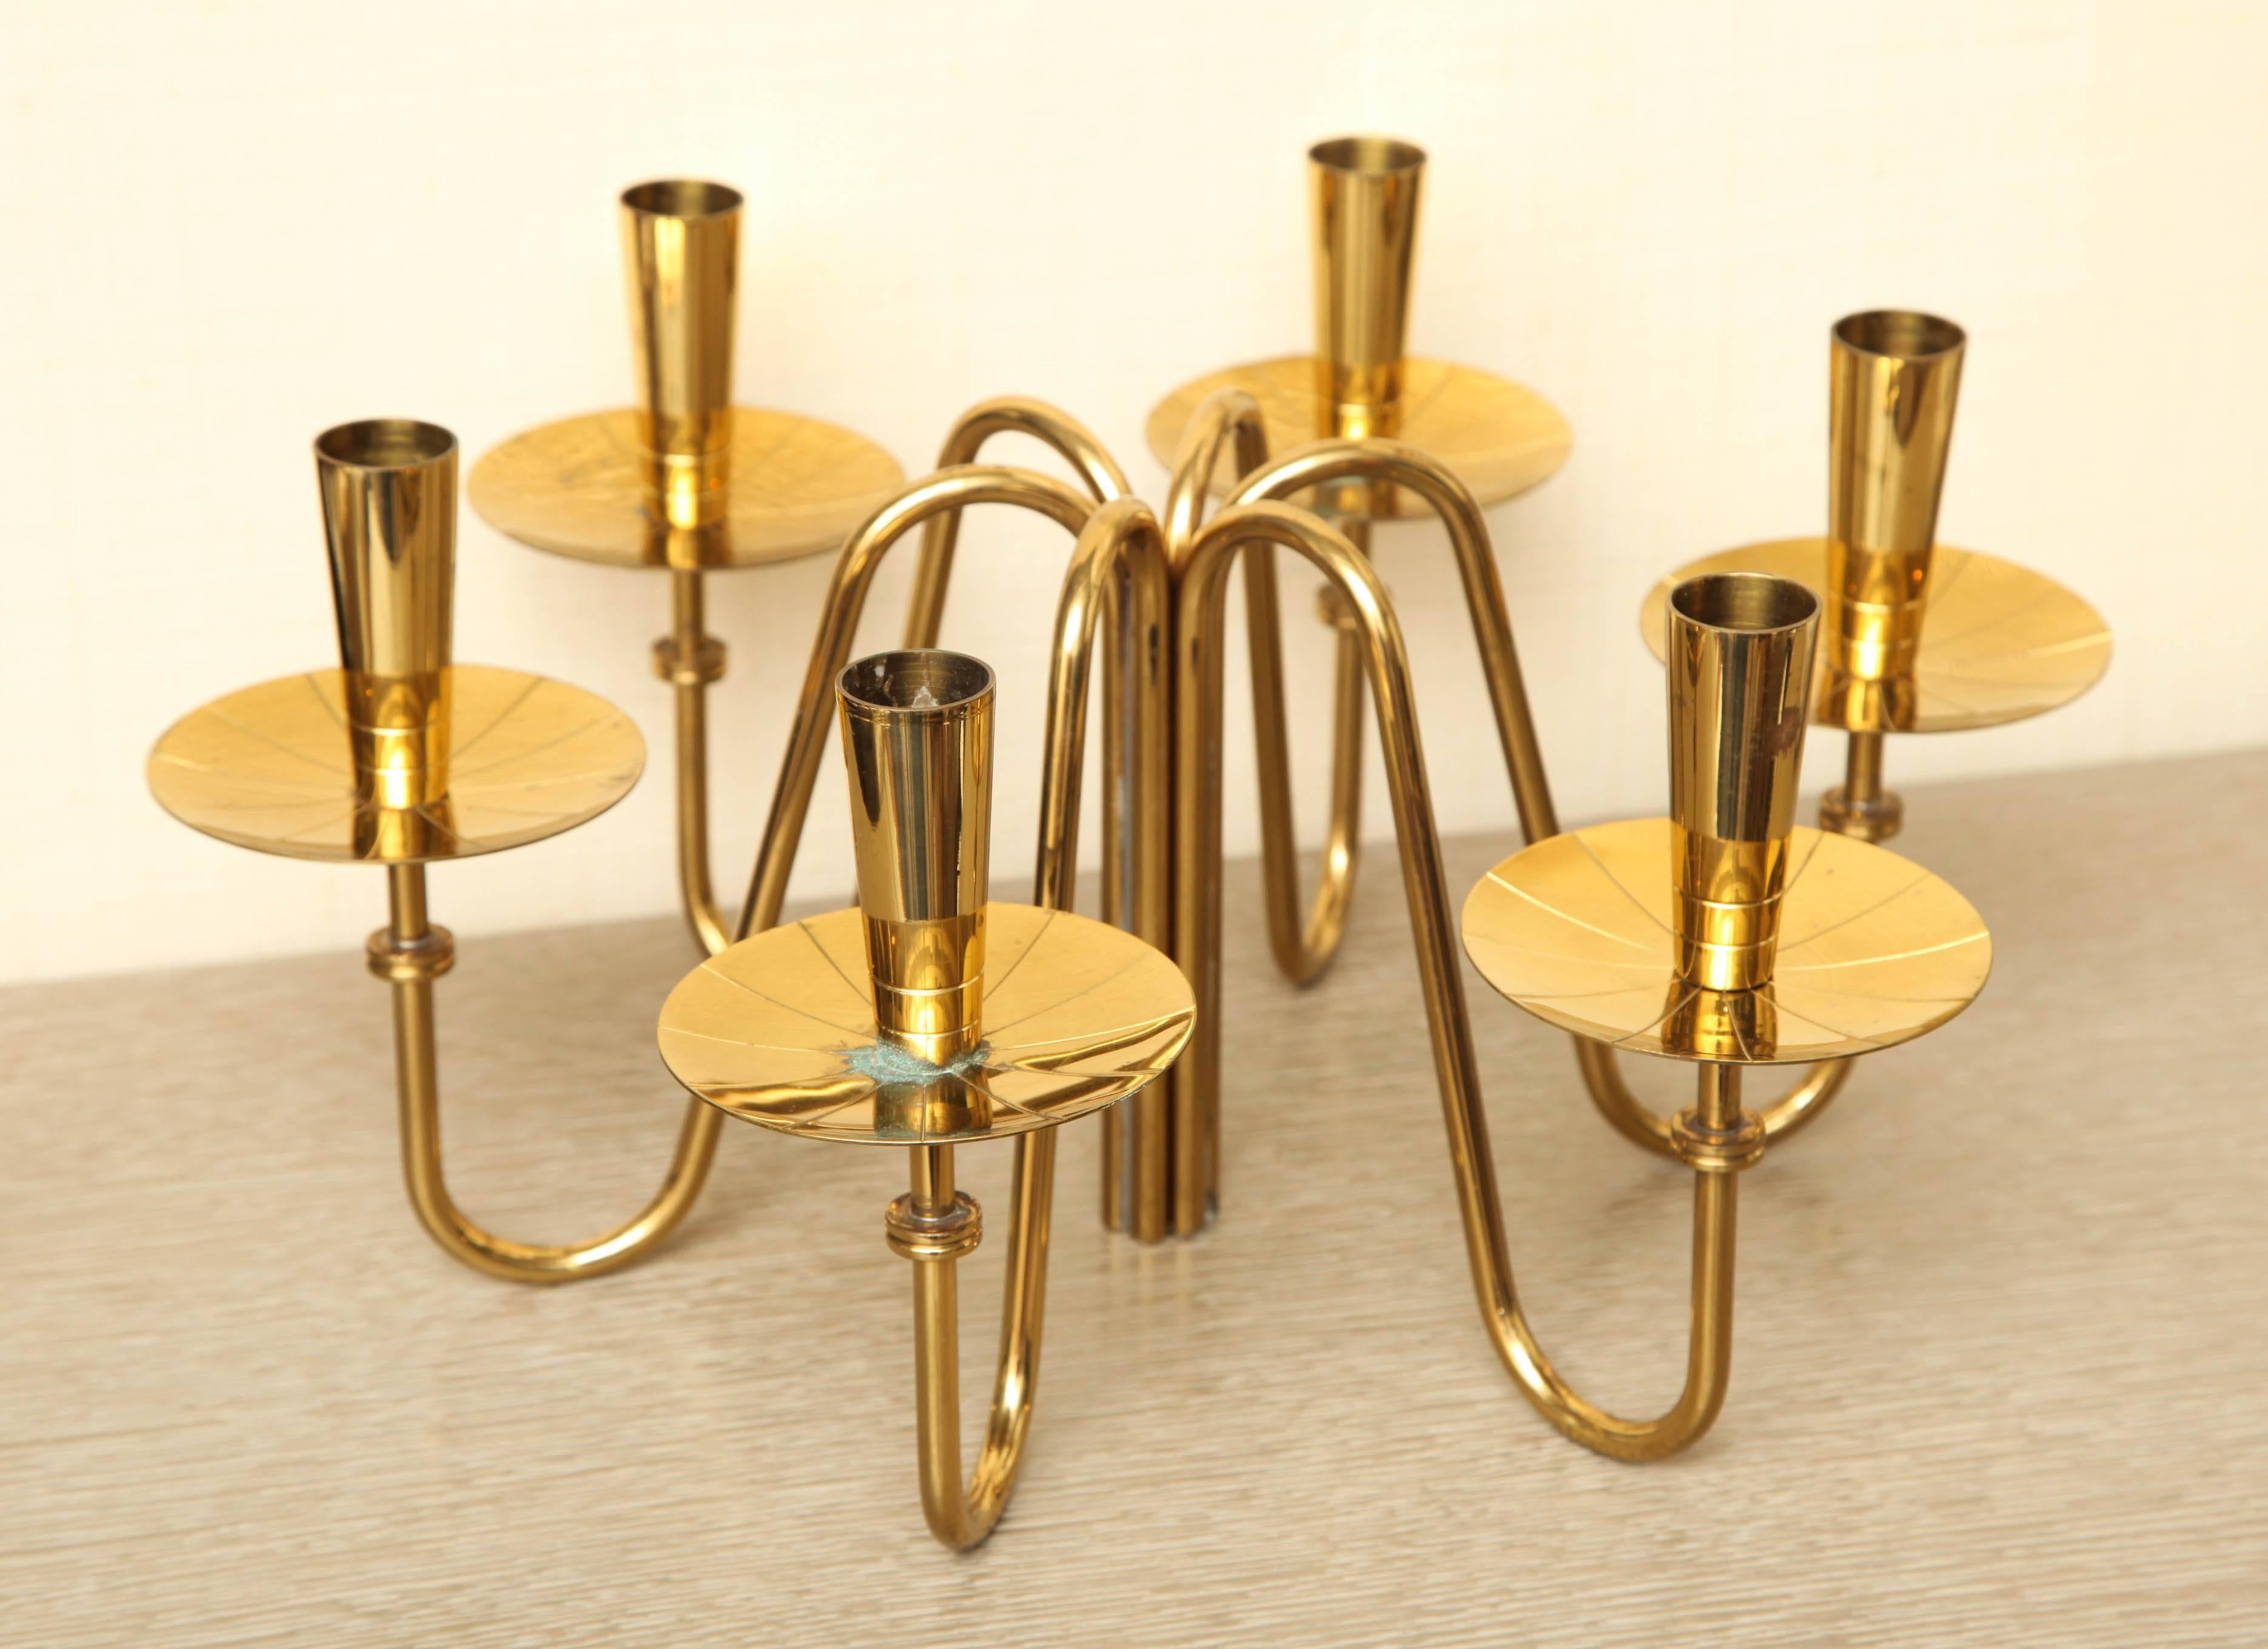 Pair of dramatic brass candle holders by Tommi Parzinger, circa 1960.